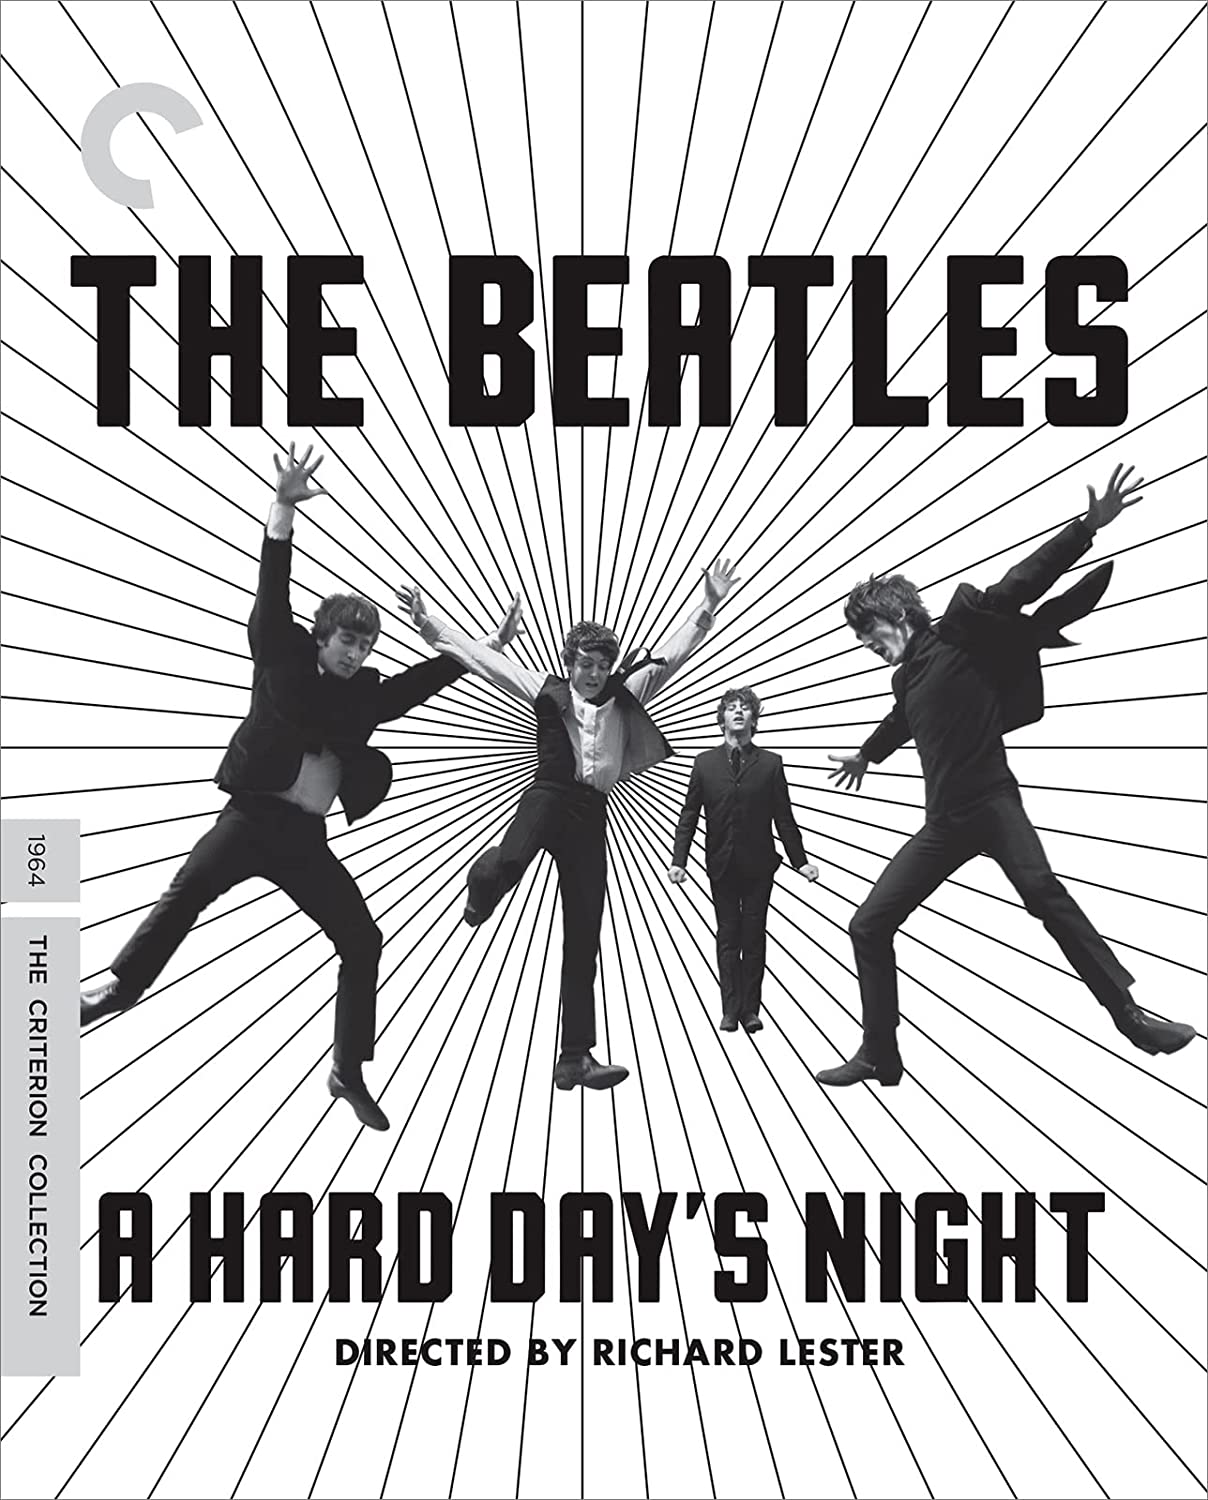 The Beatles- A Hard Day's Night (4K) (Criterion) - Darkside Records